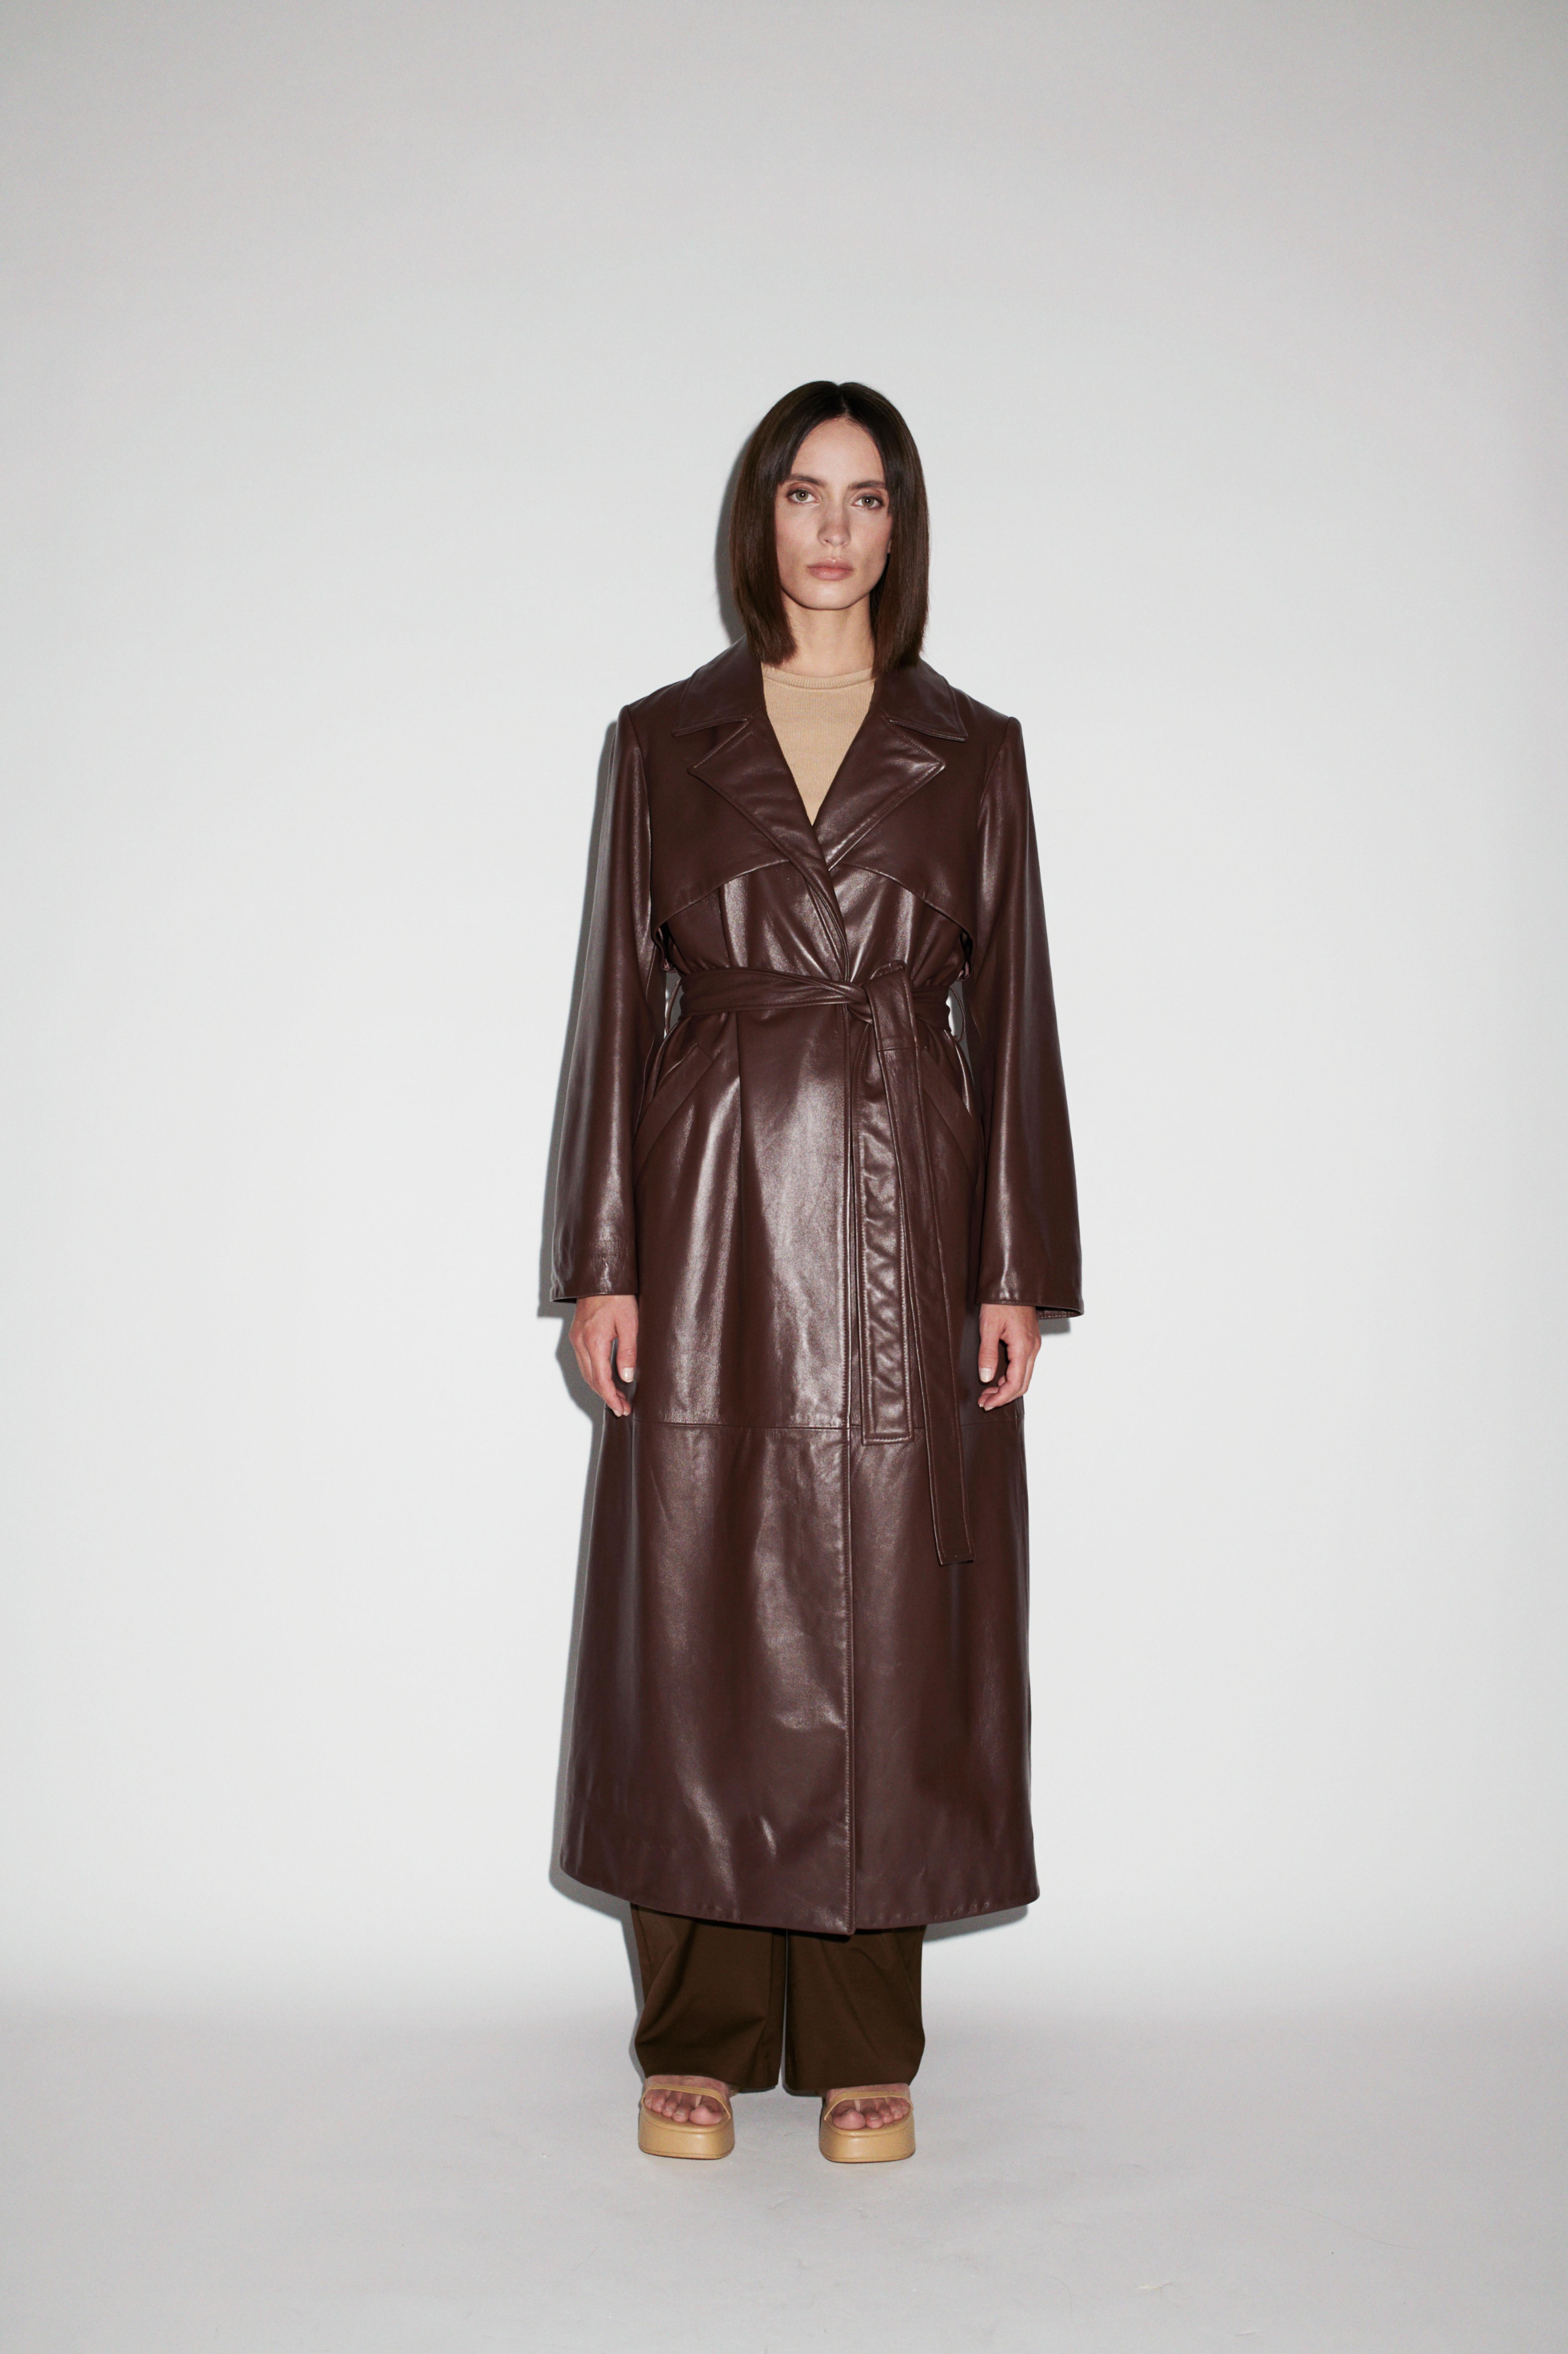 Verheyen London Leather Trench Coat in Chocolate Brown - Size uk 16

Handmade in London, made with 100% Italian Lambs Leather this luxury item is an investment piece to wear for a lifetime.  This piece is made by artisans in London, expert artisans